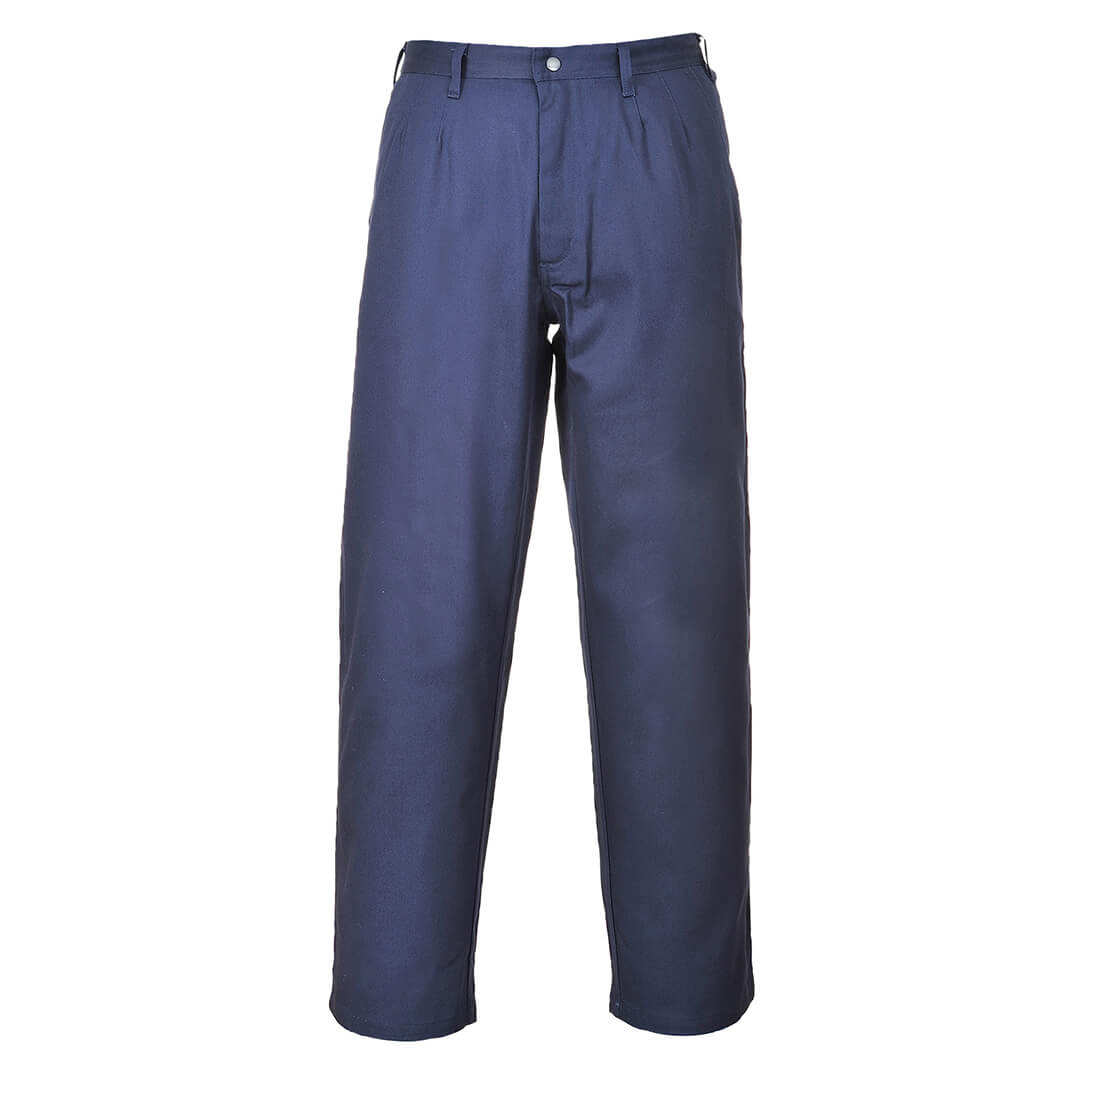 Image of Biz Flame Pro Mens Flame Resistant Trousers Navy Blue S 32"